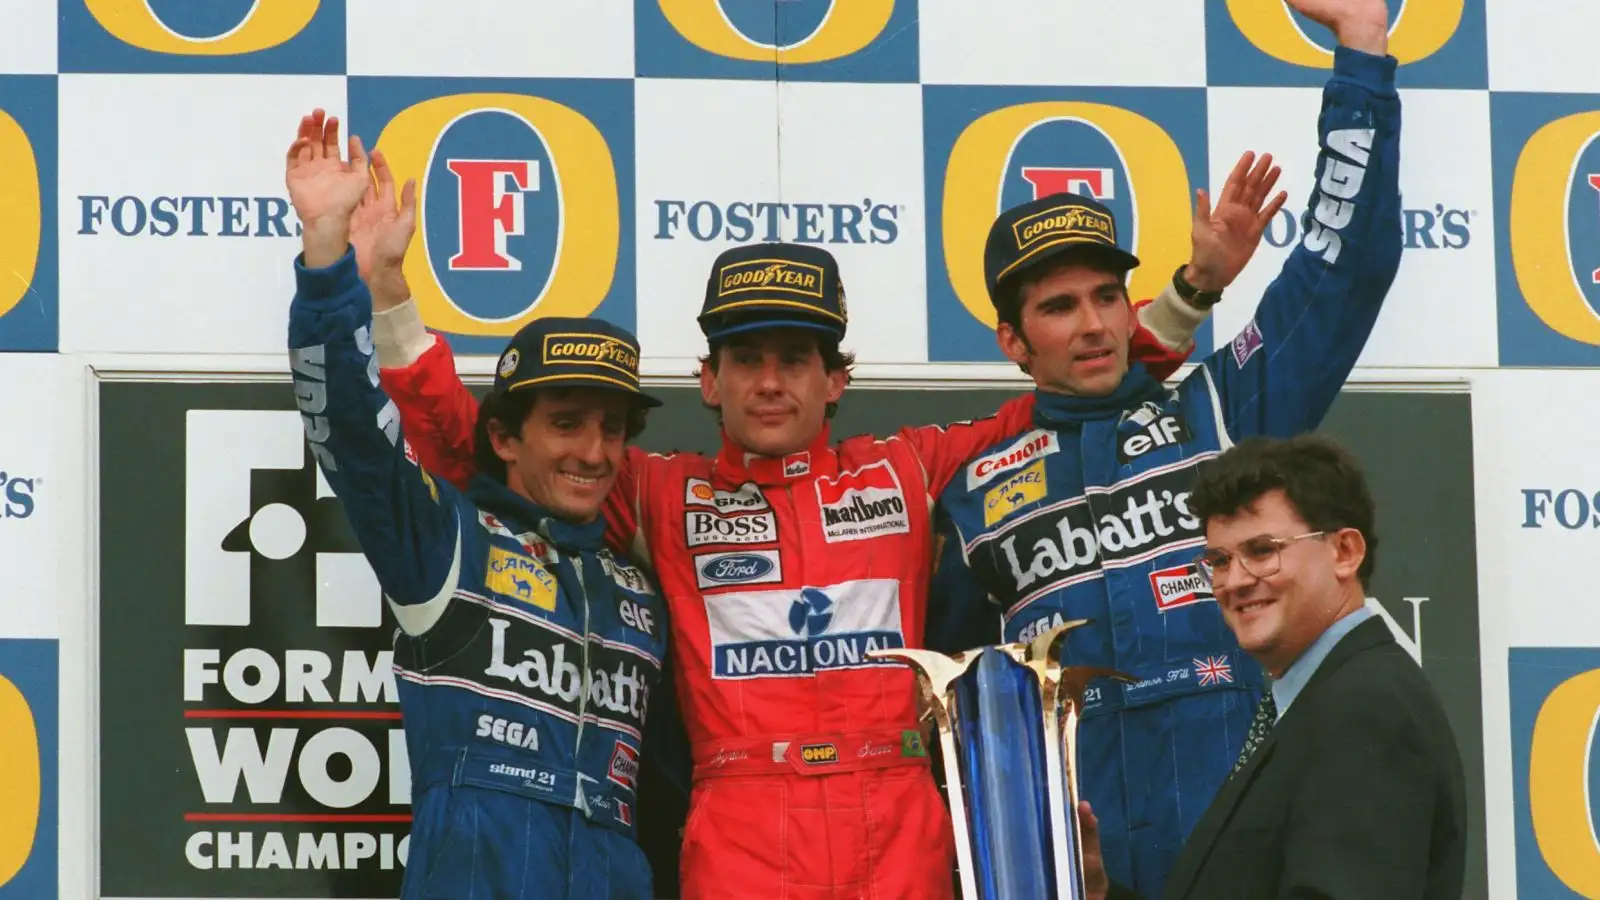 Ayrton Senna is flanked by Williams drivers Alain Prost and Damon Hill on the podium following his final F1 victory at Adelaide 1993.